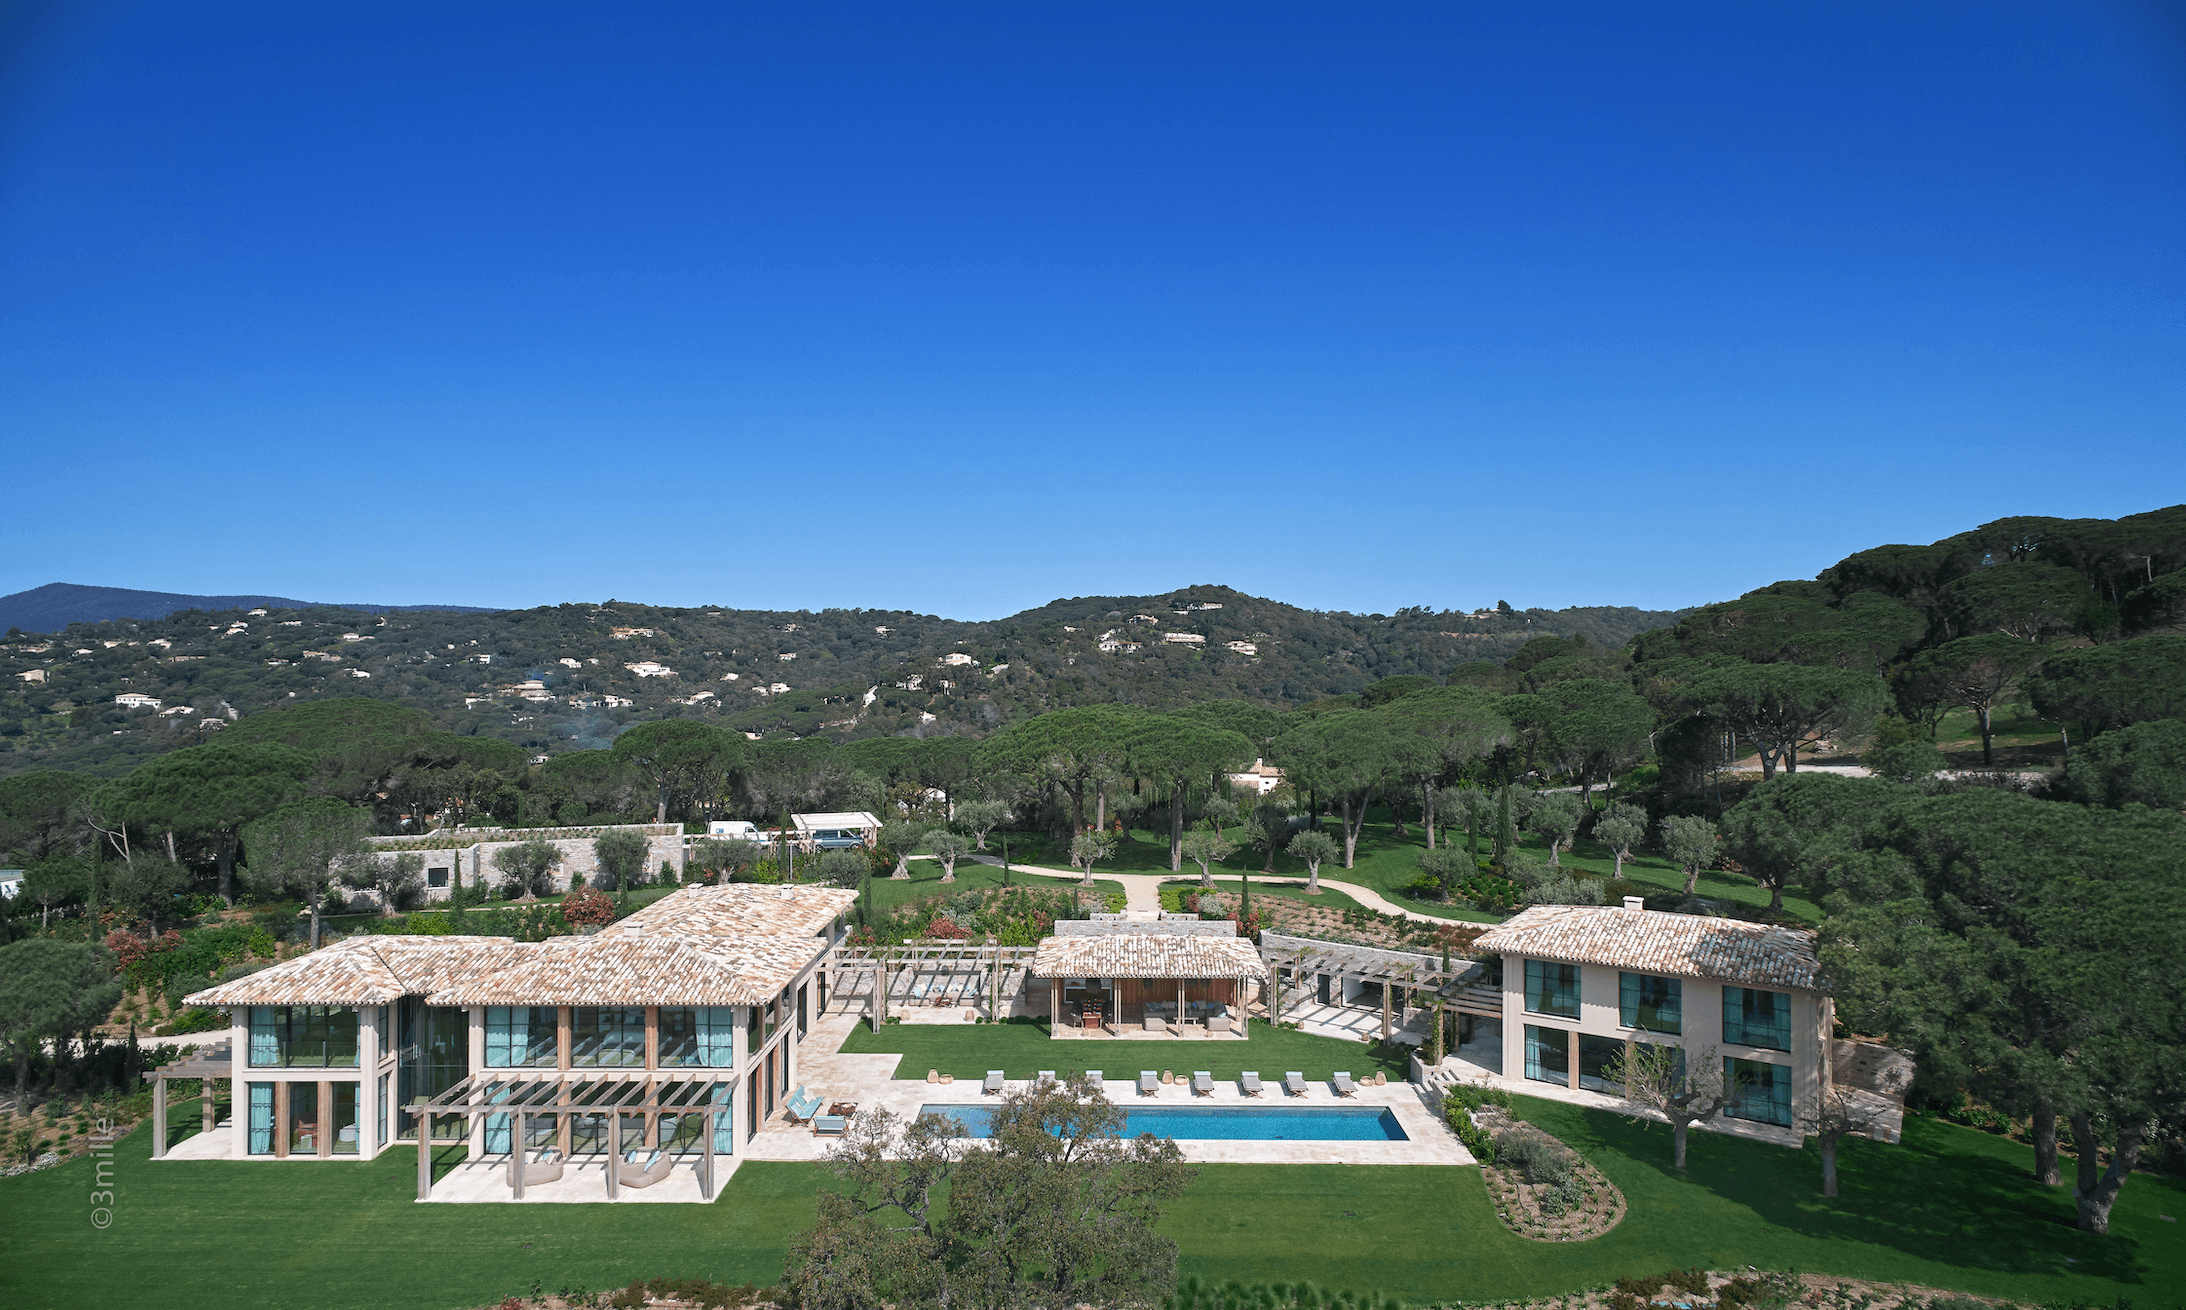 La Croix-Valmer, An Amazing new built property with panoramic sea view located close to Ramatuelle